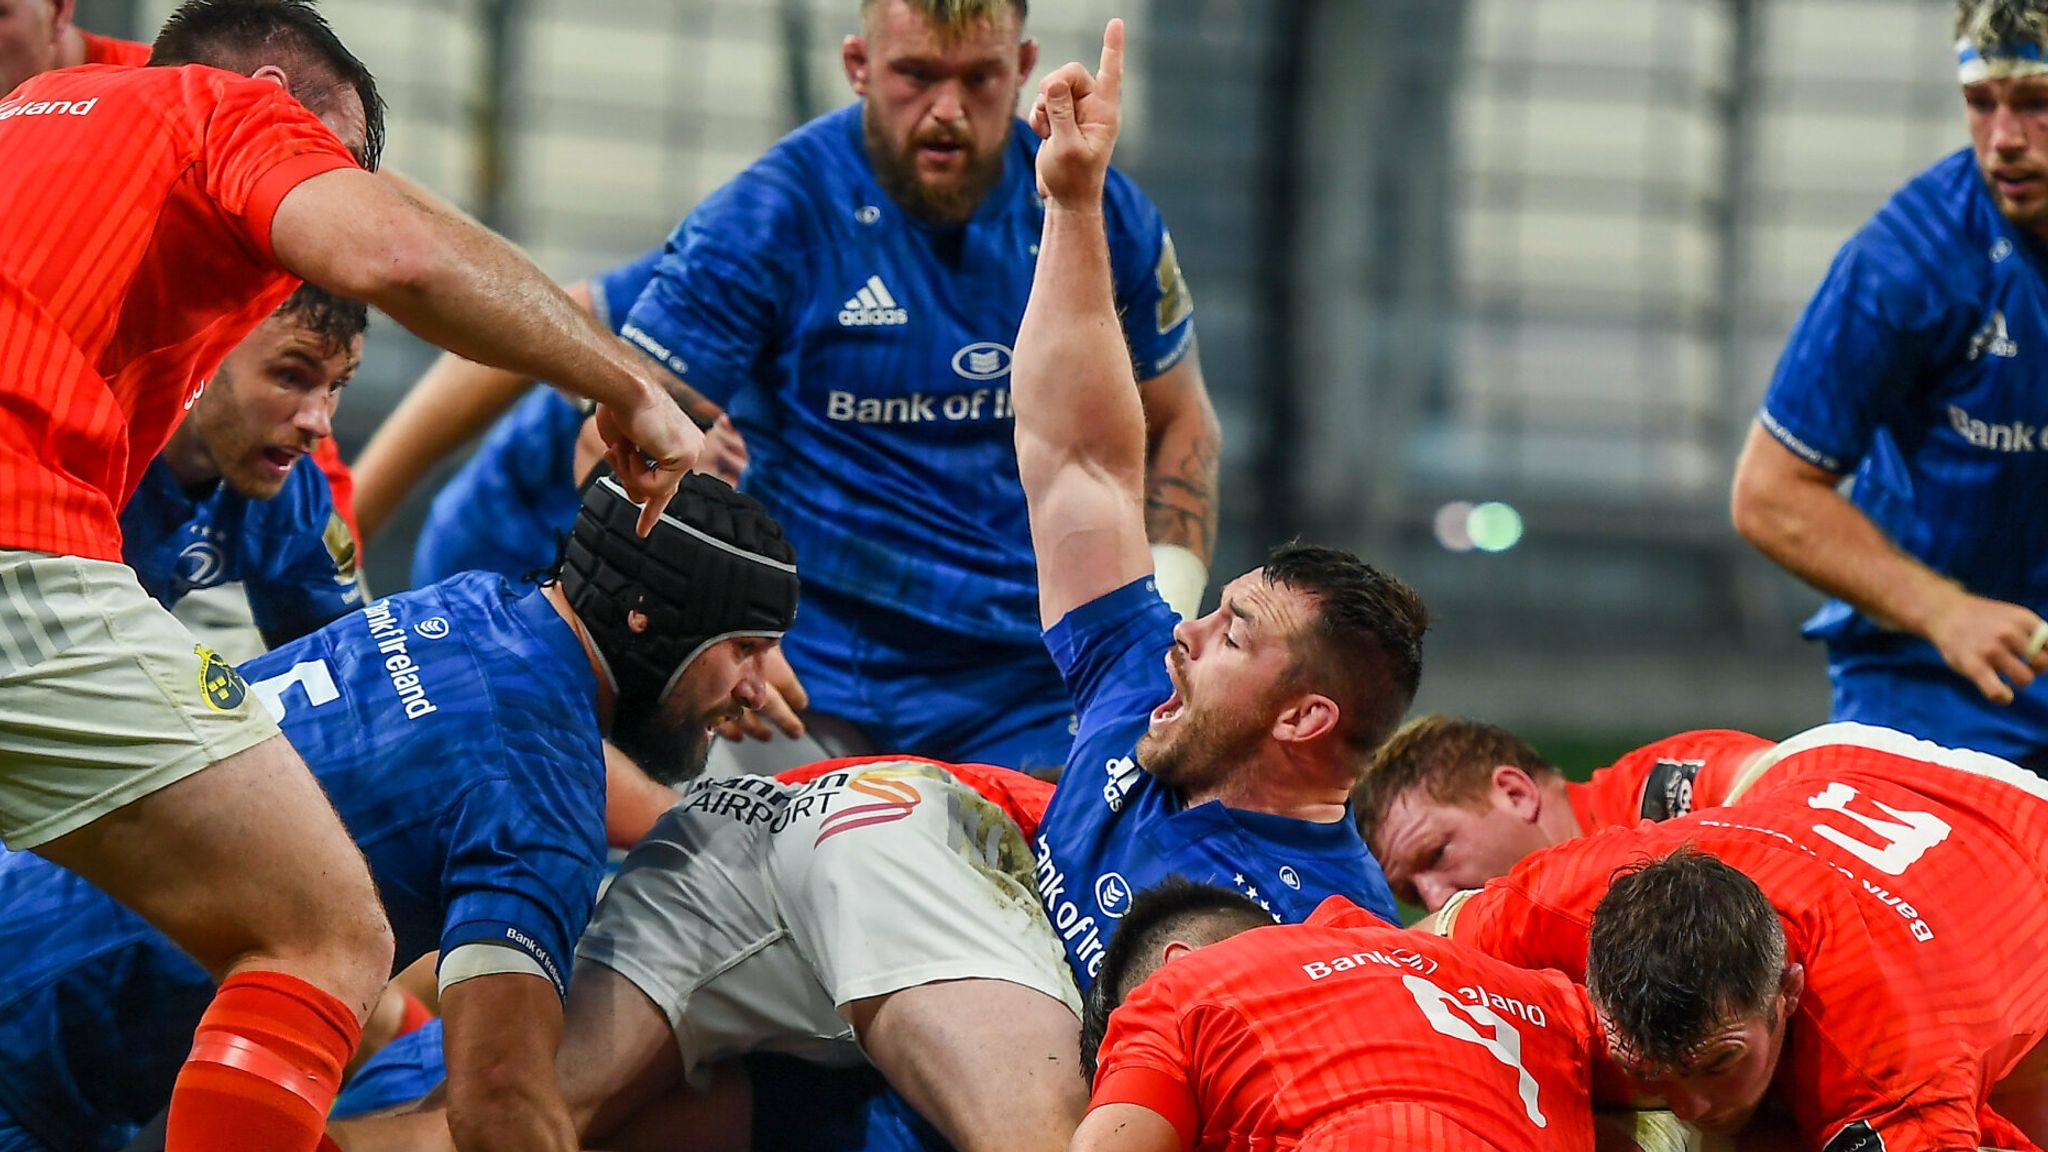 Munster, Leinster fully loaded for Guinness PRO14 interprovincial derby clash Rugby Union News Sky Sports